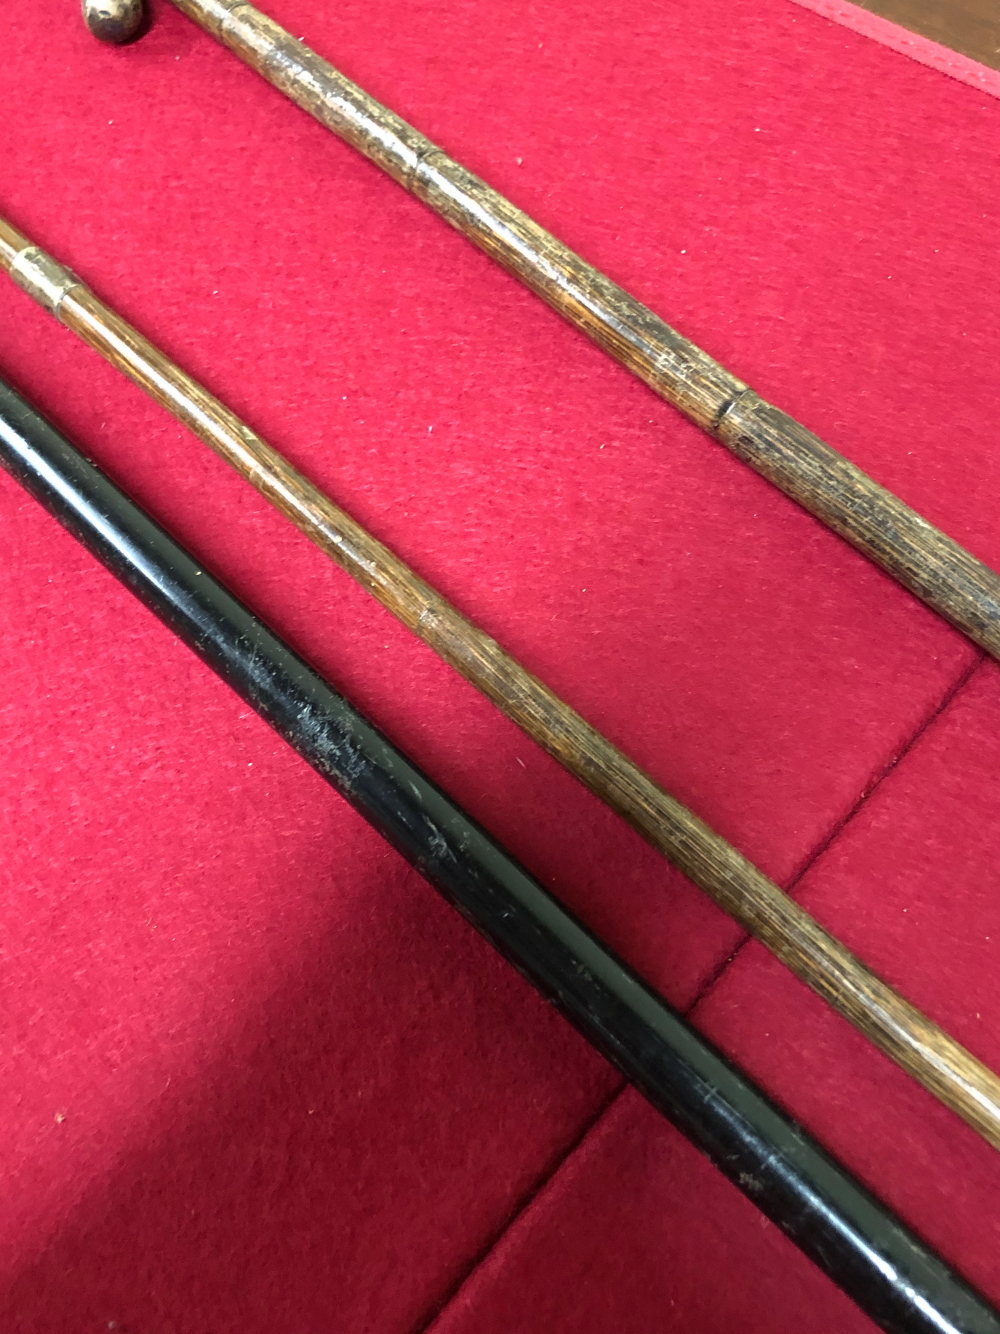 A SILVER TOPPED BLACK MALACCA WALKING CANE AND TWO BAMBOO WALKING STICKS WITH WHITE METAL MOUNTS - Image 19 of 20